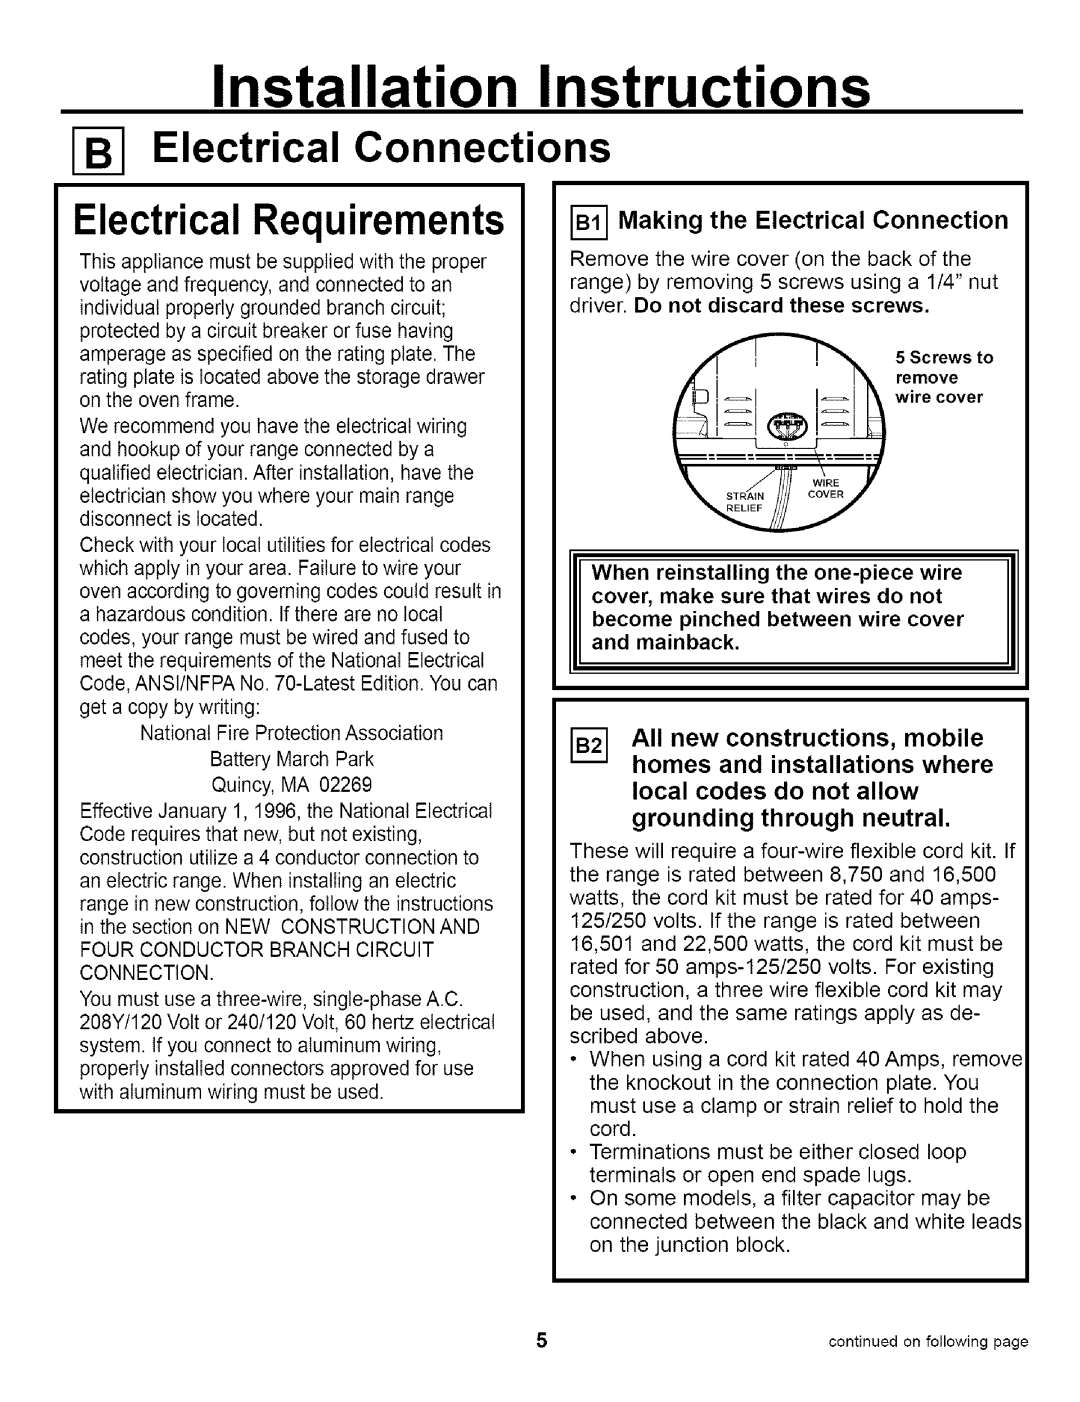 GE JBP79 Electrical Connections, Electrical Requirements, I-_Making the Electrical Connection, Installation Instructions 